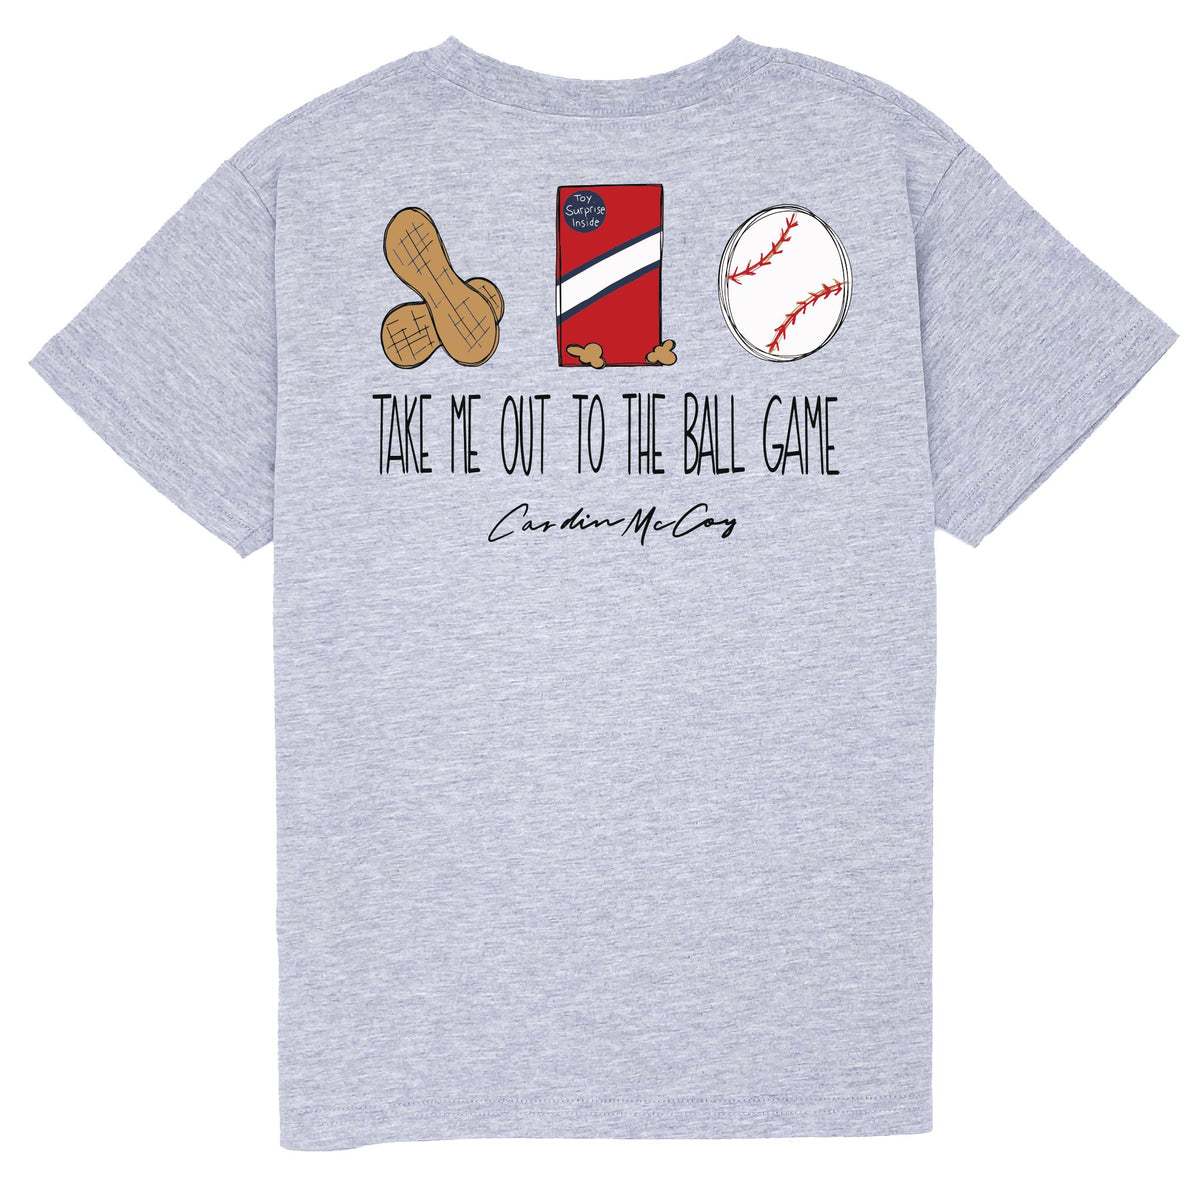 Kids' Take Me Out to the Ball Game Short Sleeve Pocket Tee Short Sleeve T-Shirt Cardin McCoy Heather Gray XXS (2/3) 